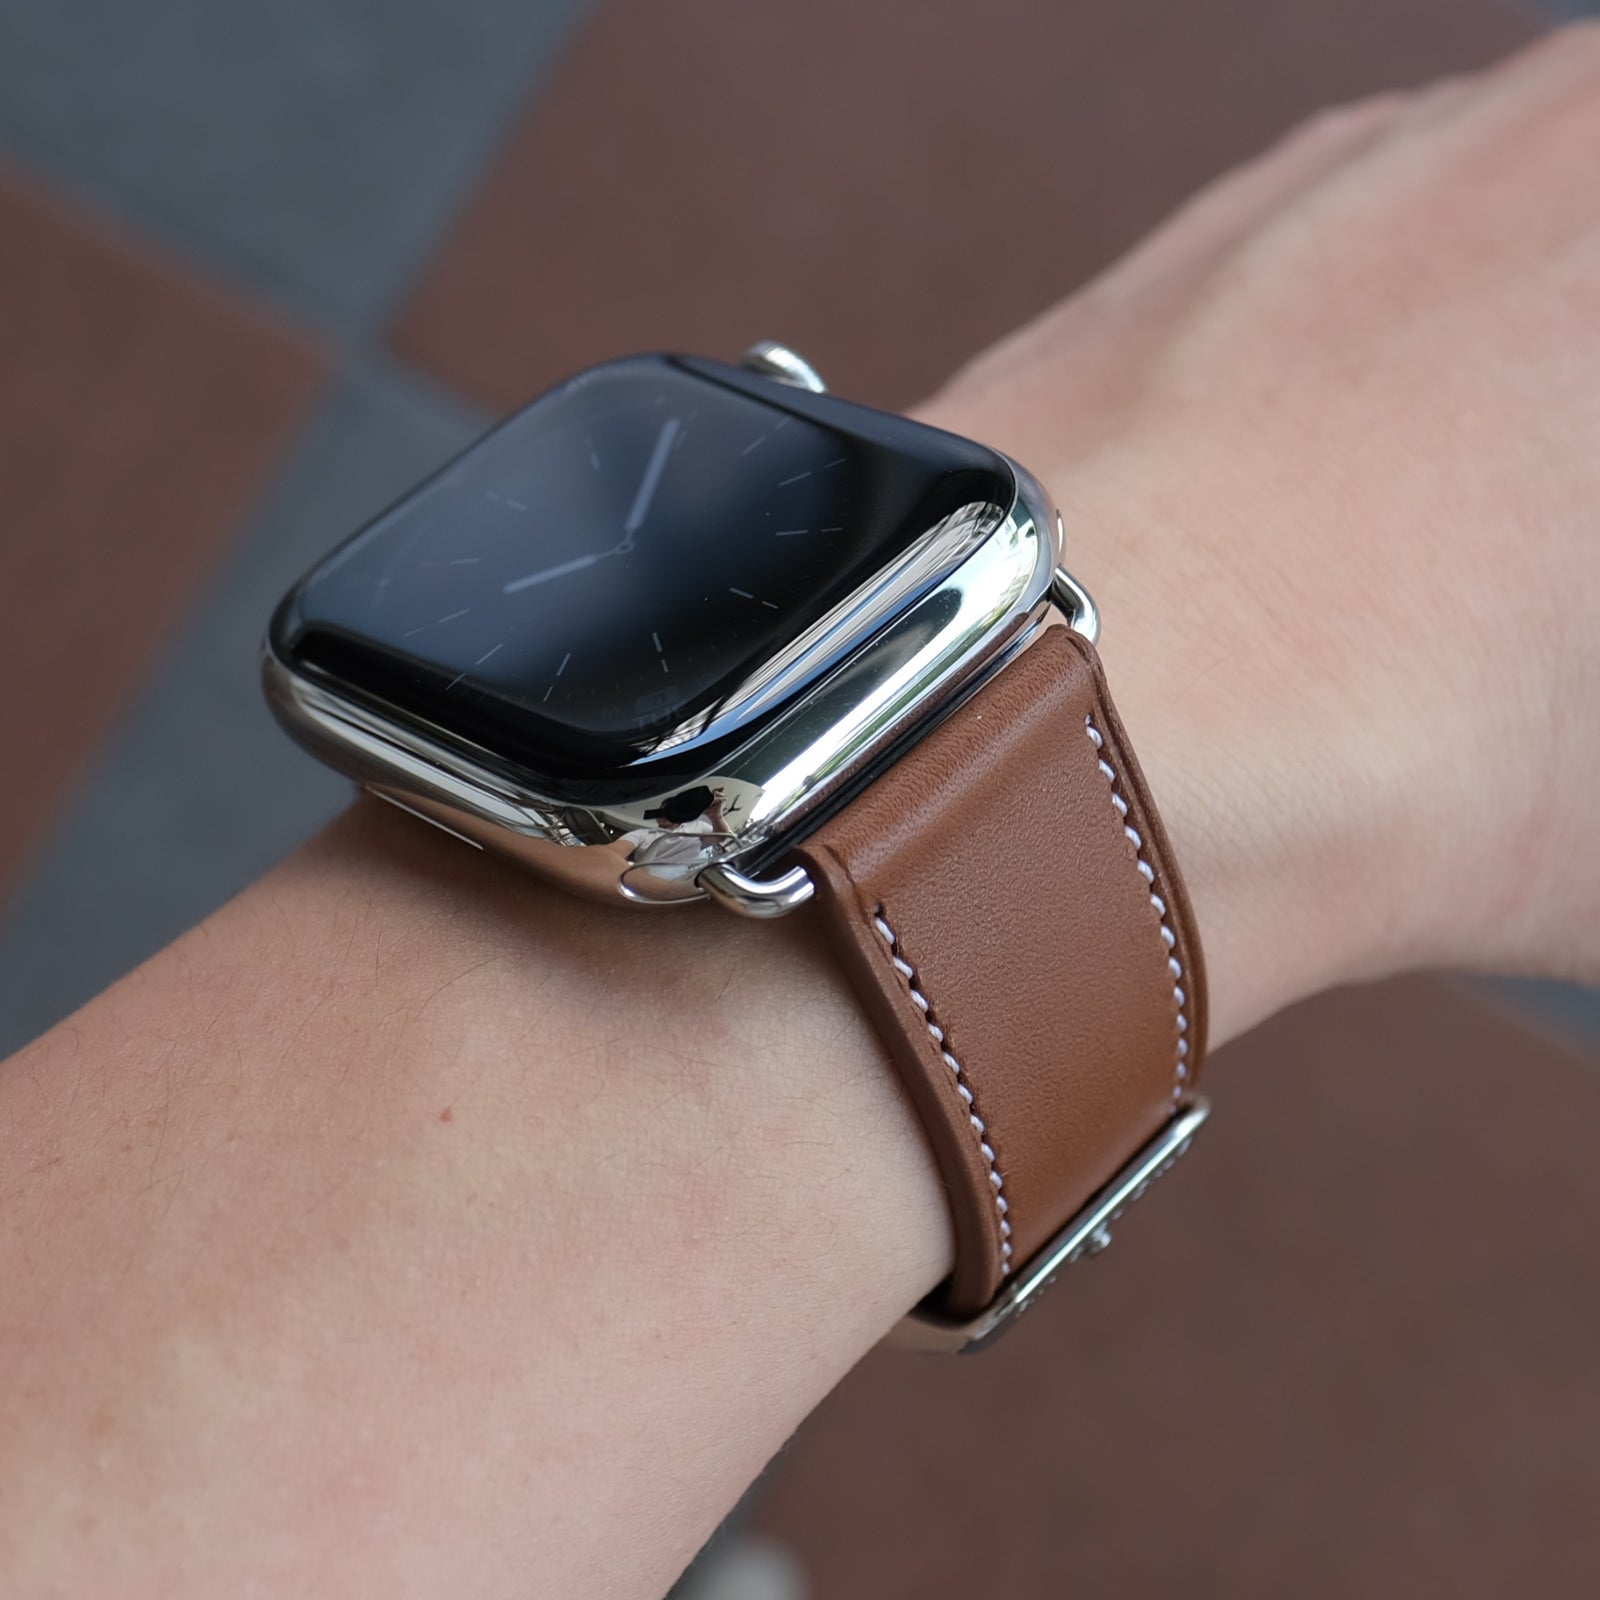 Apple watch band Hermes 44mm ebene barenia leather for Sale in